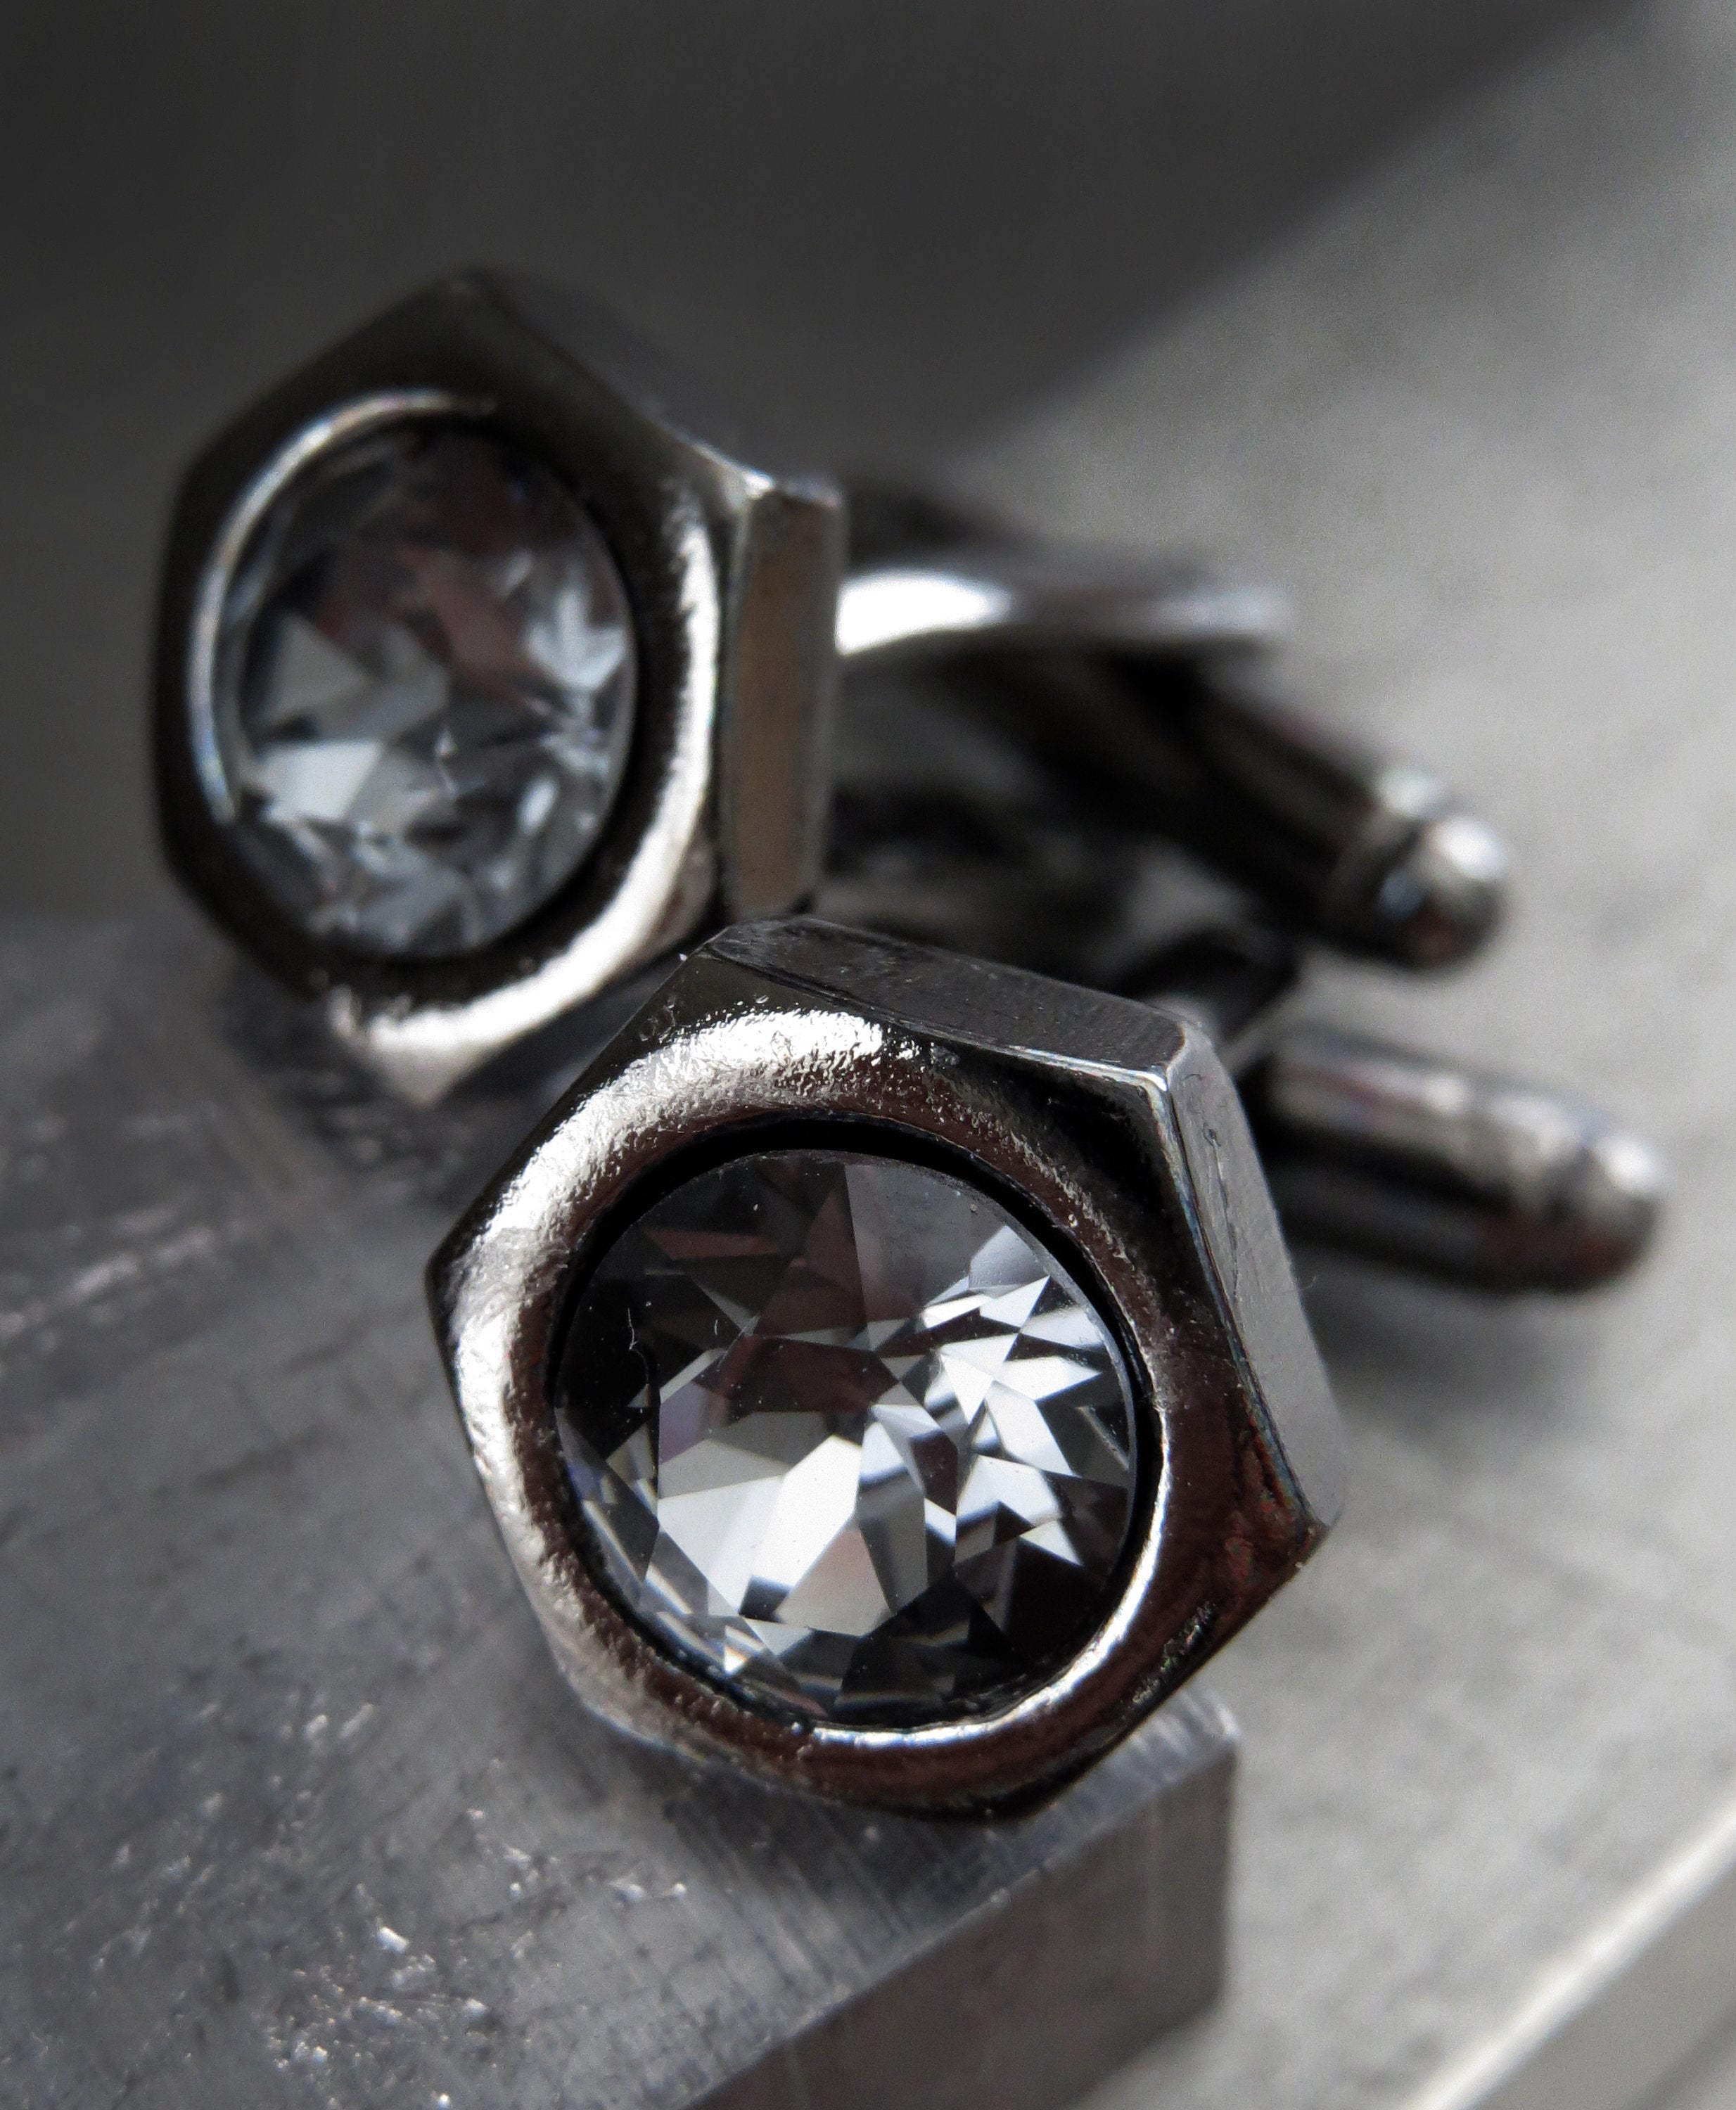 Black Hex Nut Cuff Links with Black Crystal